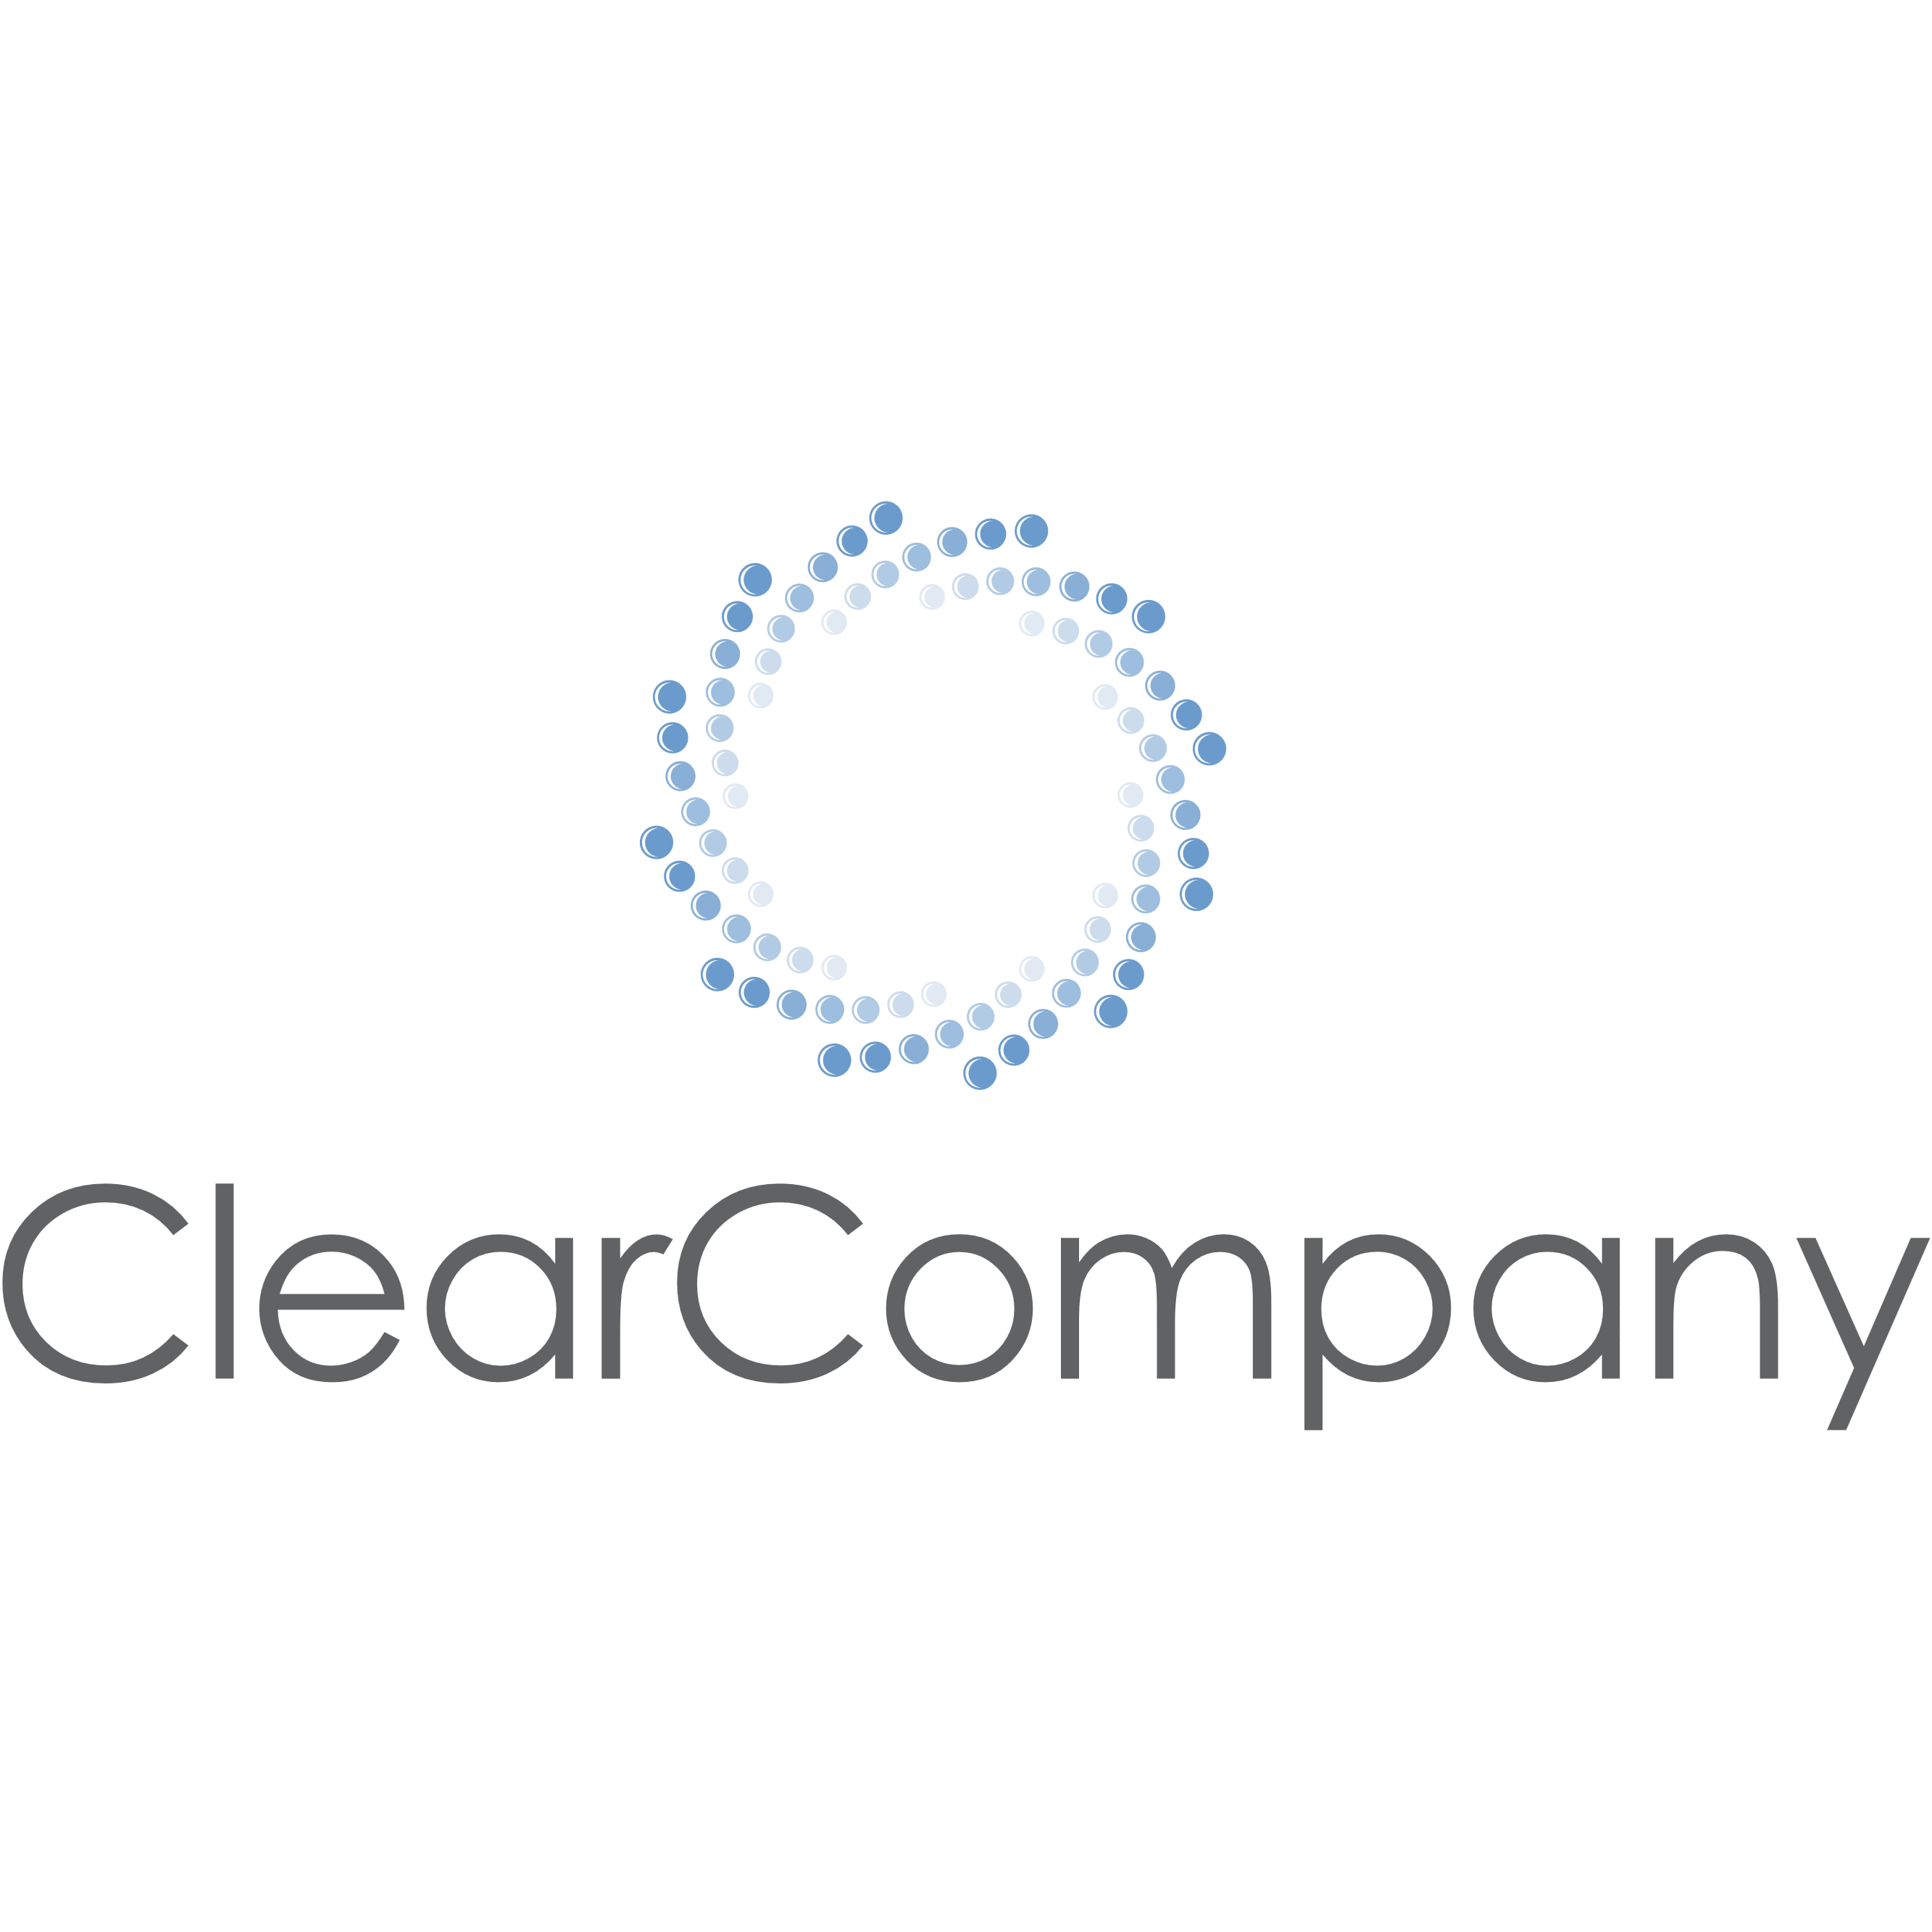 Clear Company Logo - ClearCompany Review